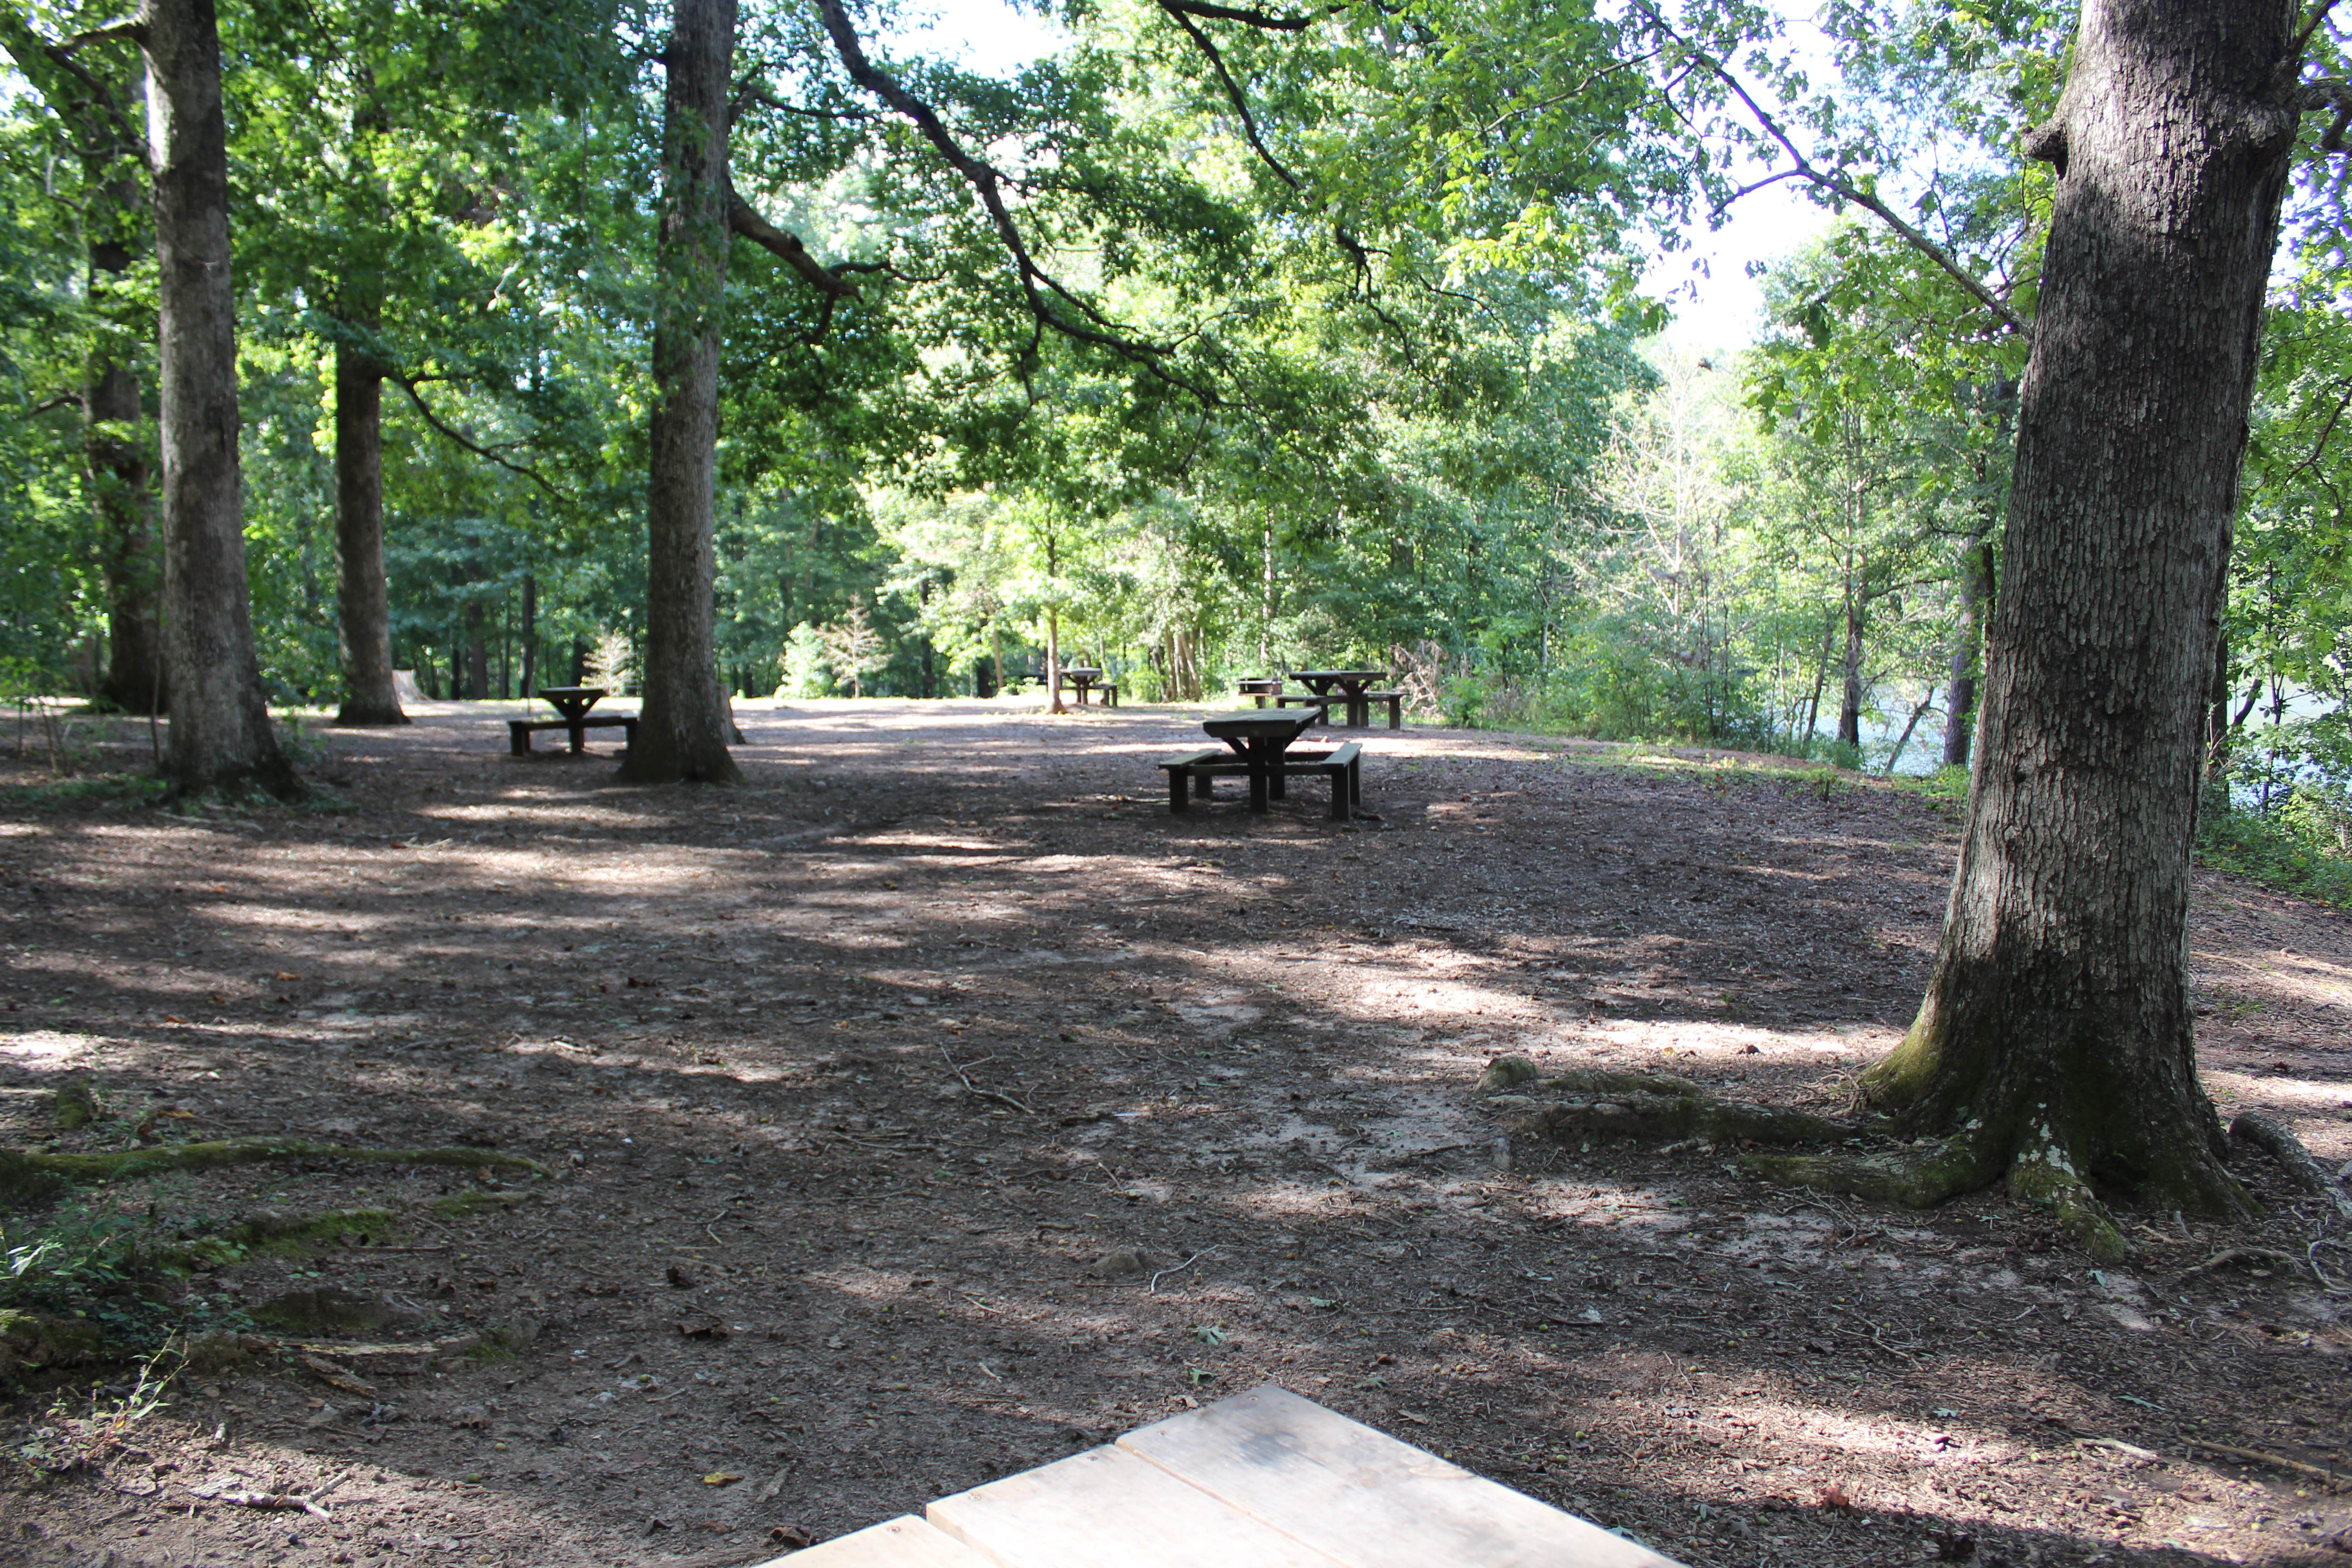 Picnic tables by the lake